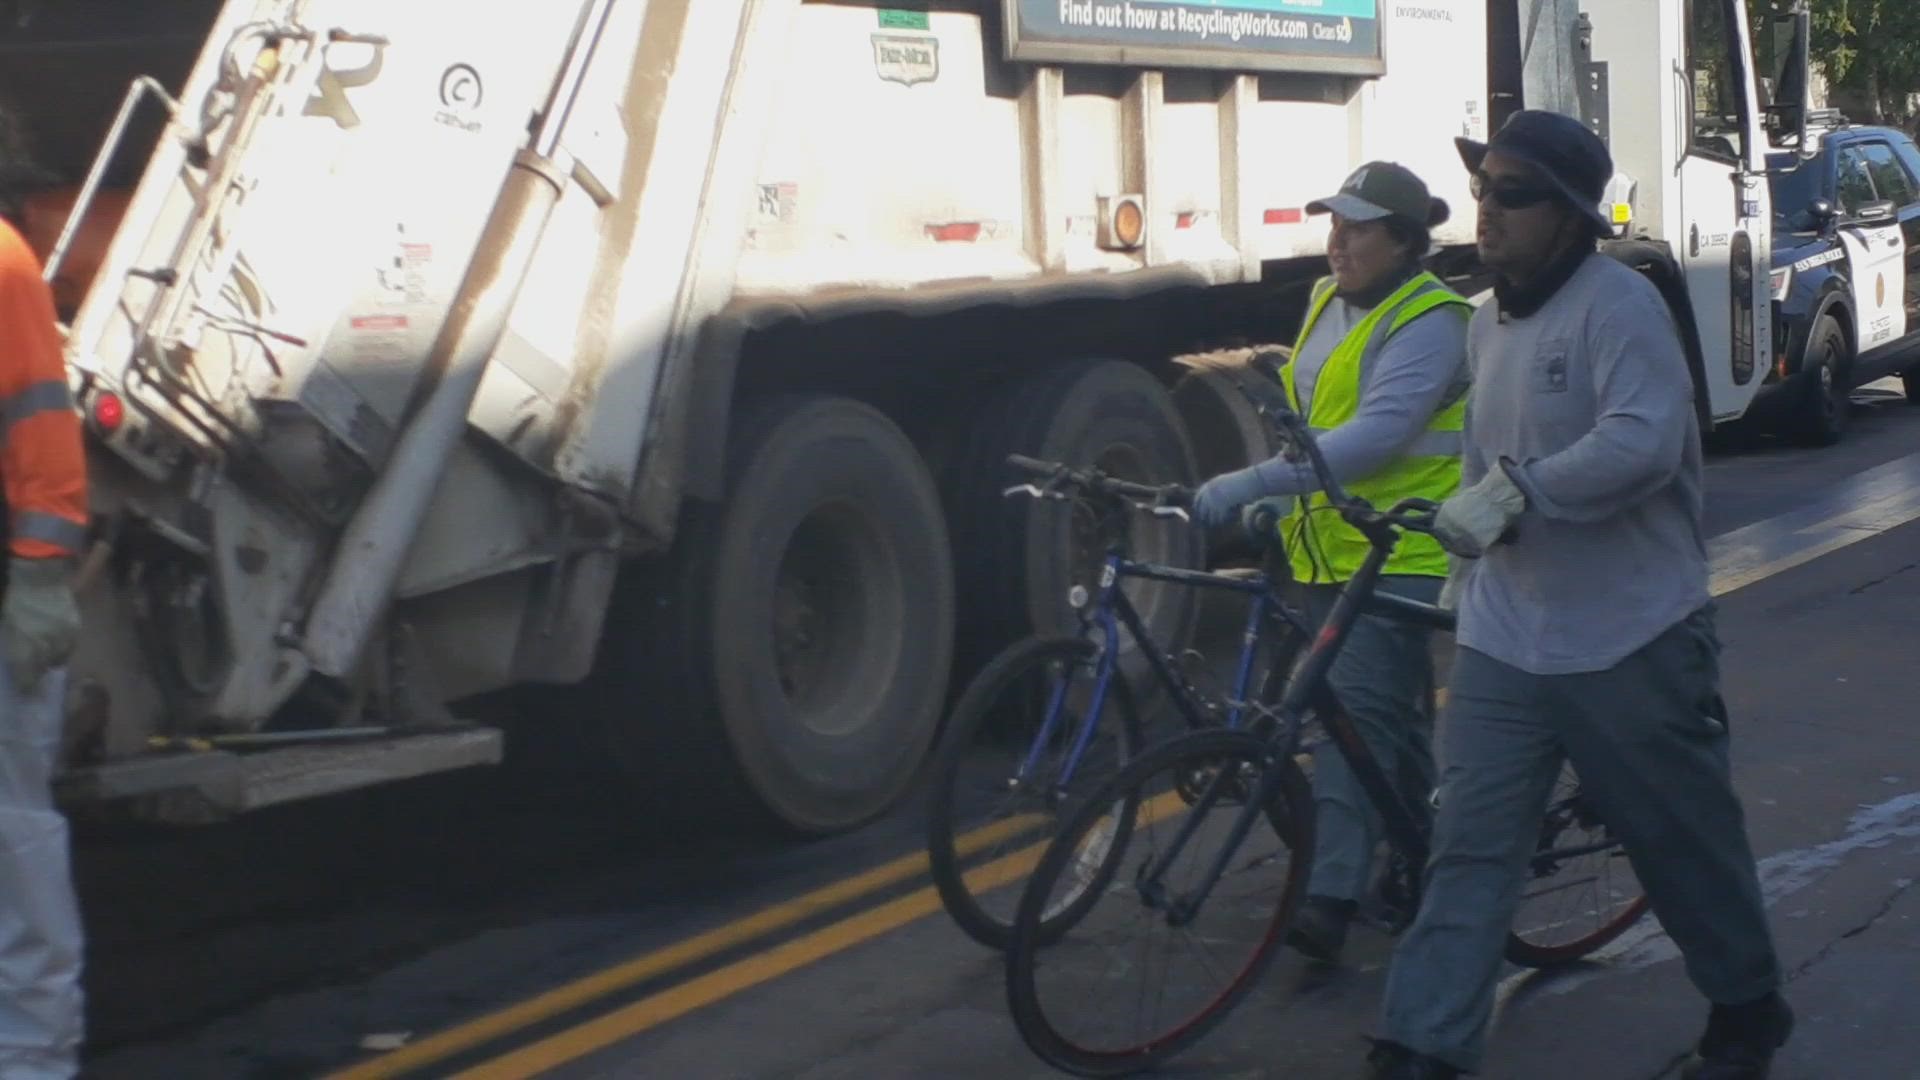 April 14 video shows two bikes getting thrown in trash truck